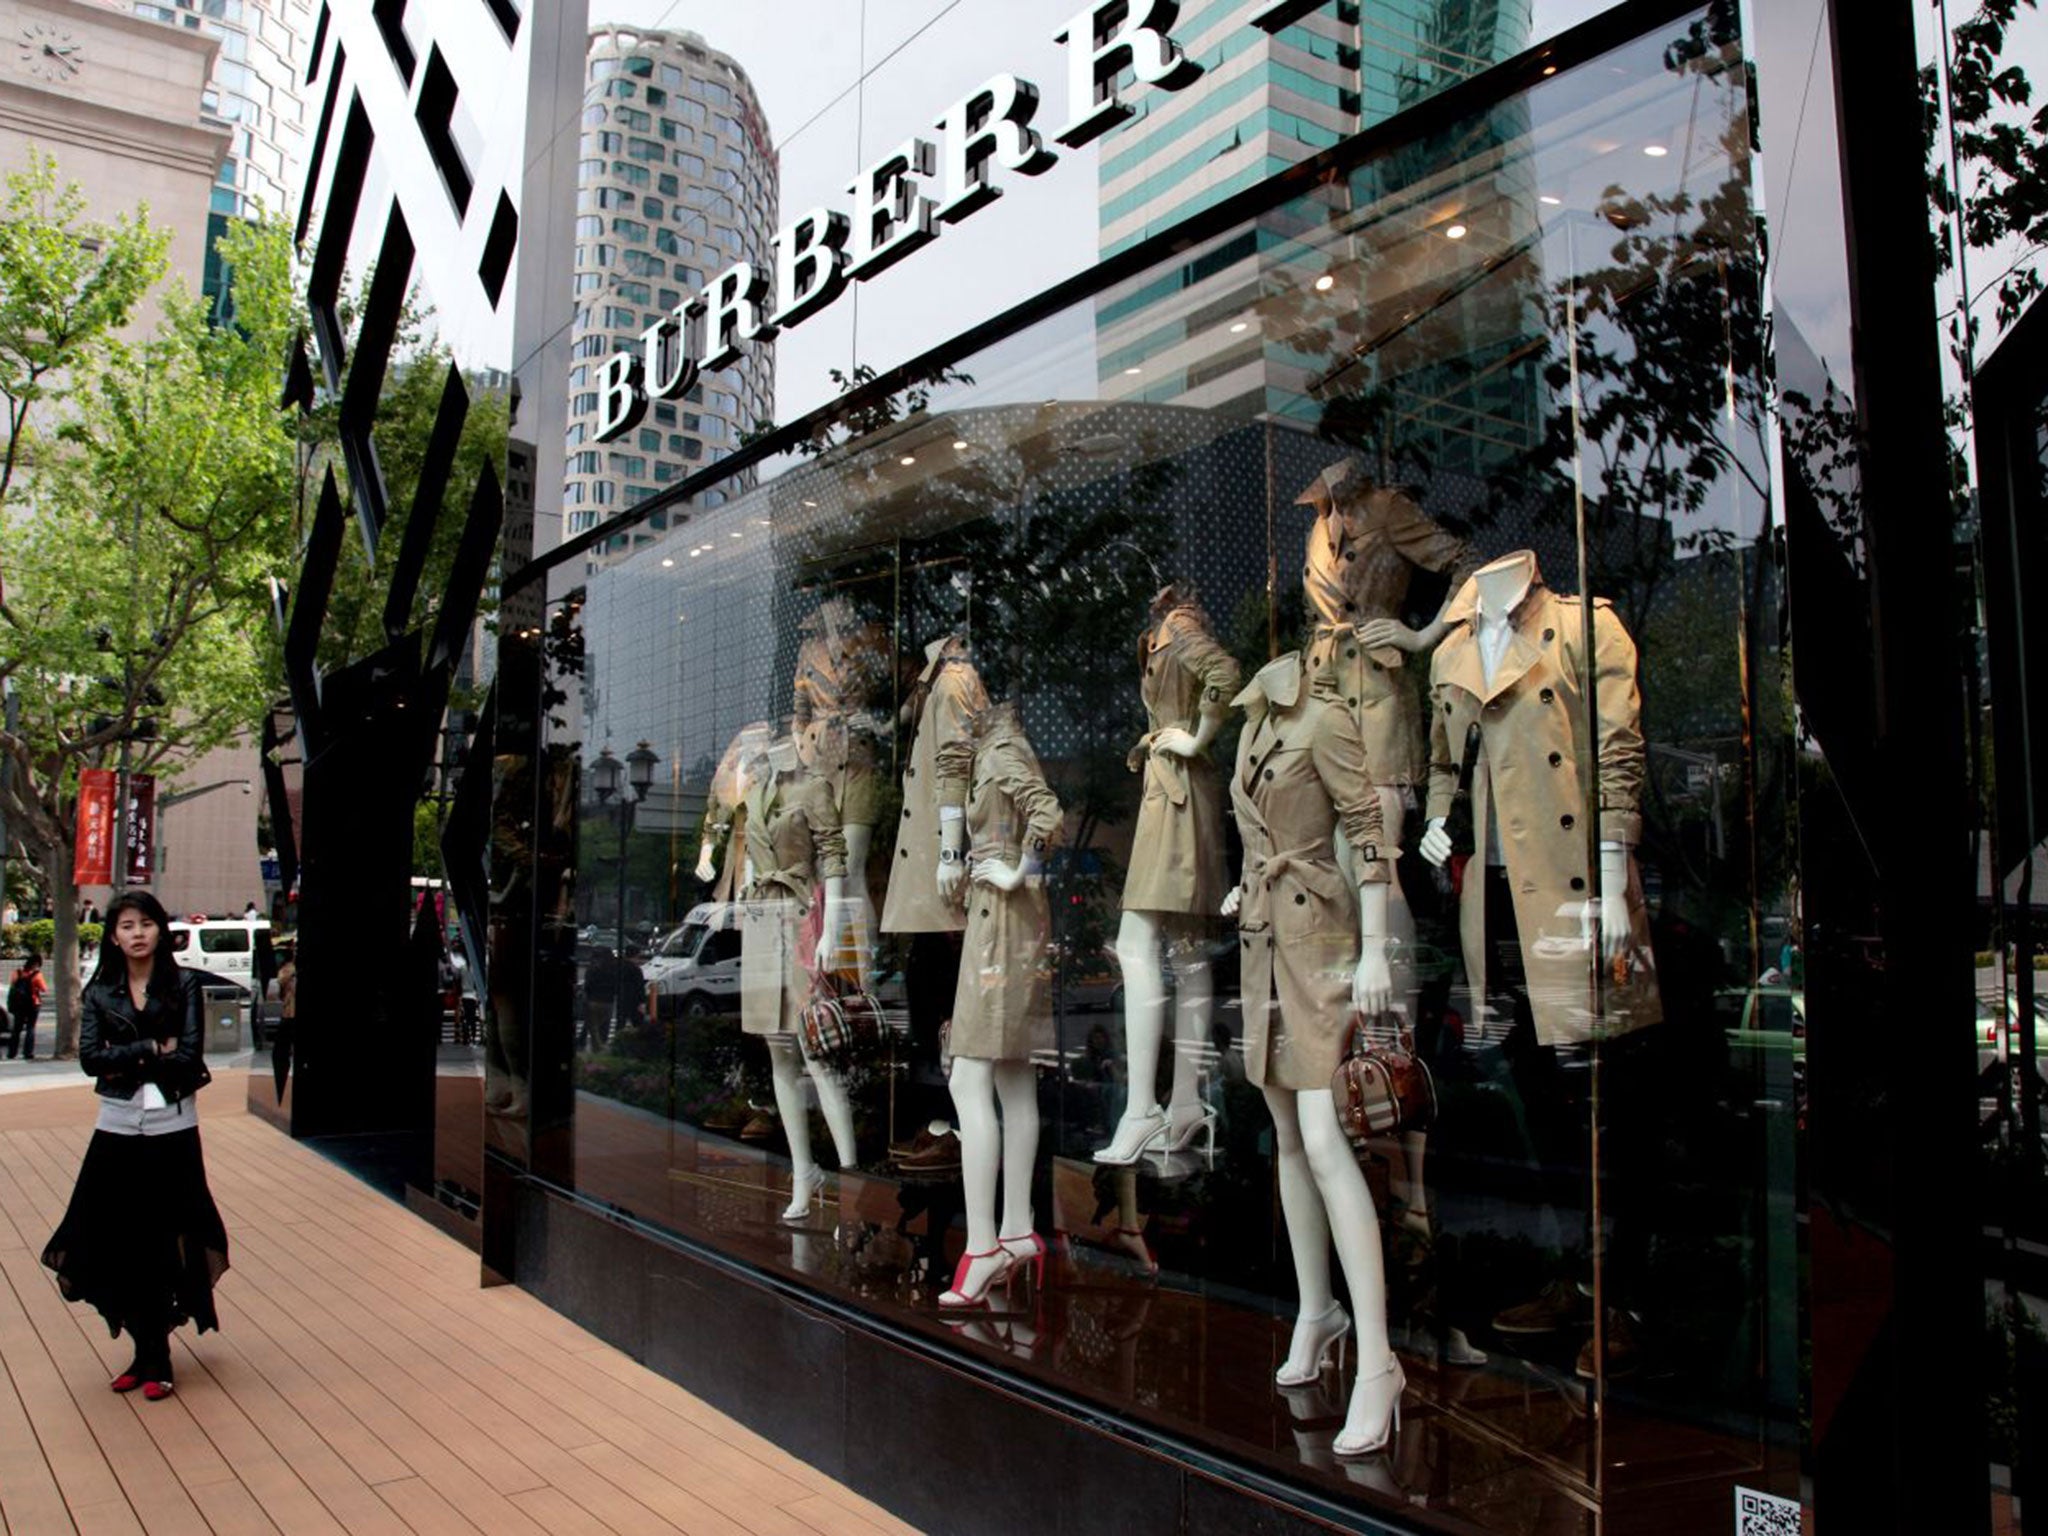 Pressure is increasing on Chief Executive Officer Christopher Bailey after Burberry predicted last month that earnings this year would be at the low end of estimates